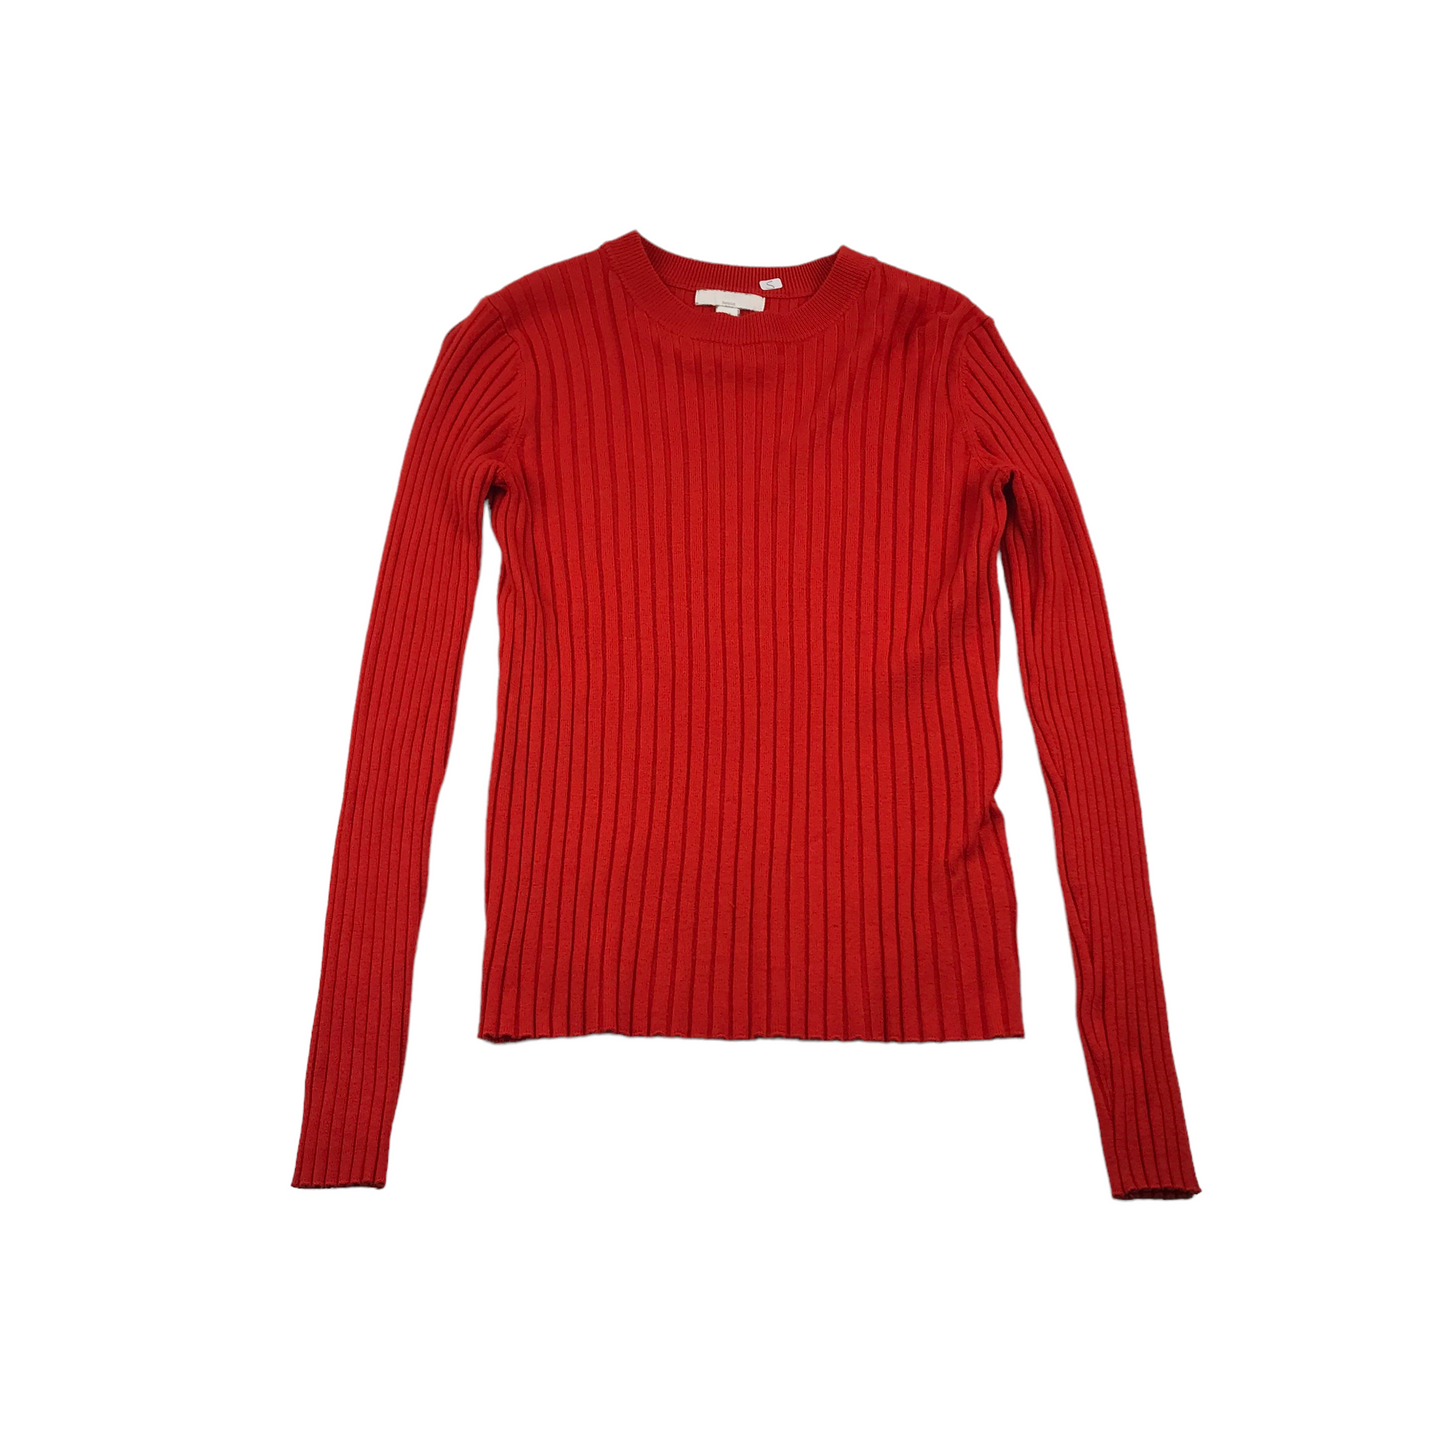 H&M Red Knitted Long Sleeve T-shirt Women's Size S